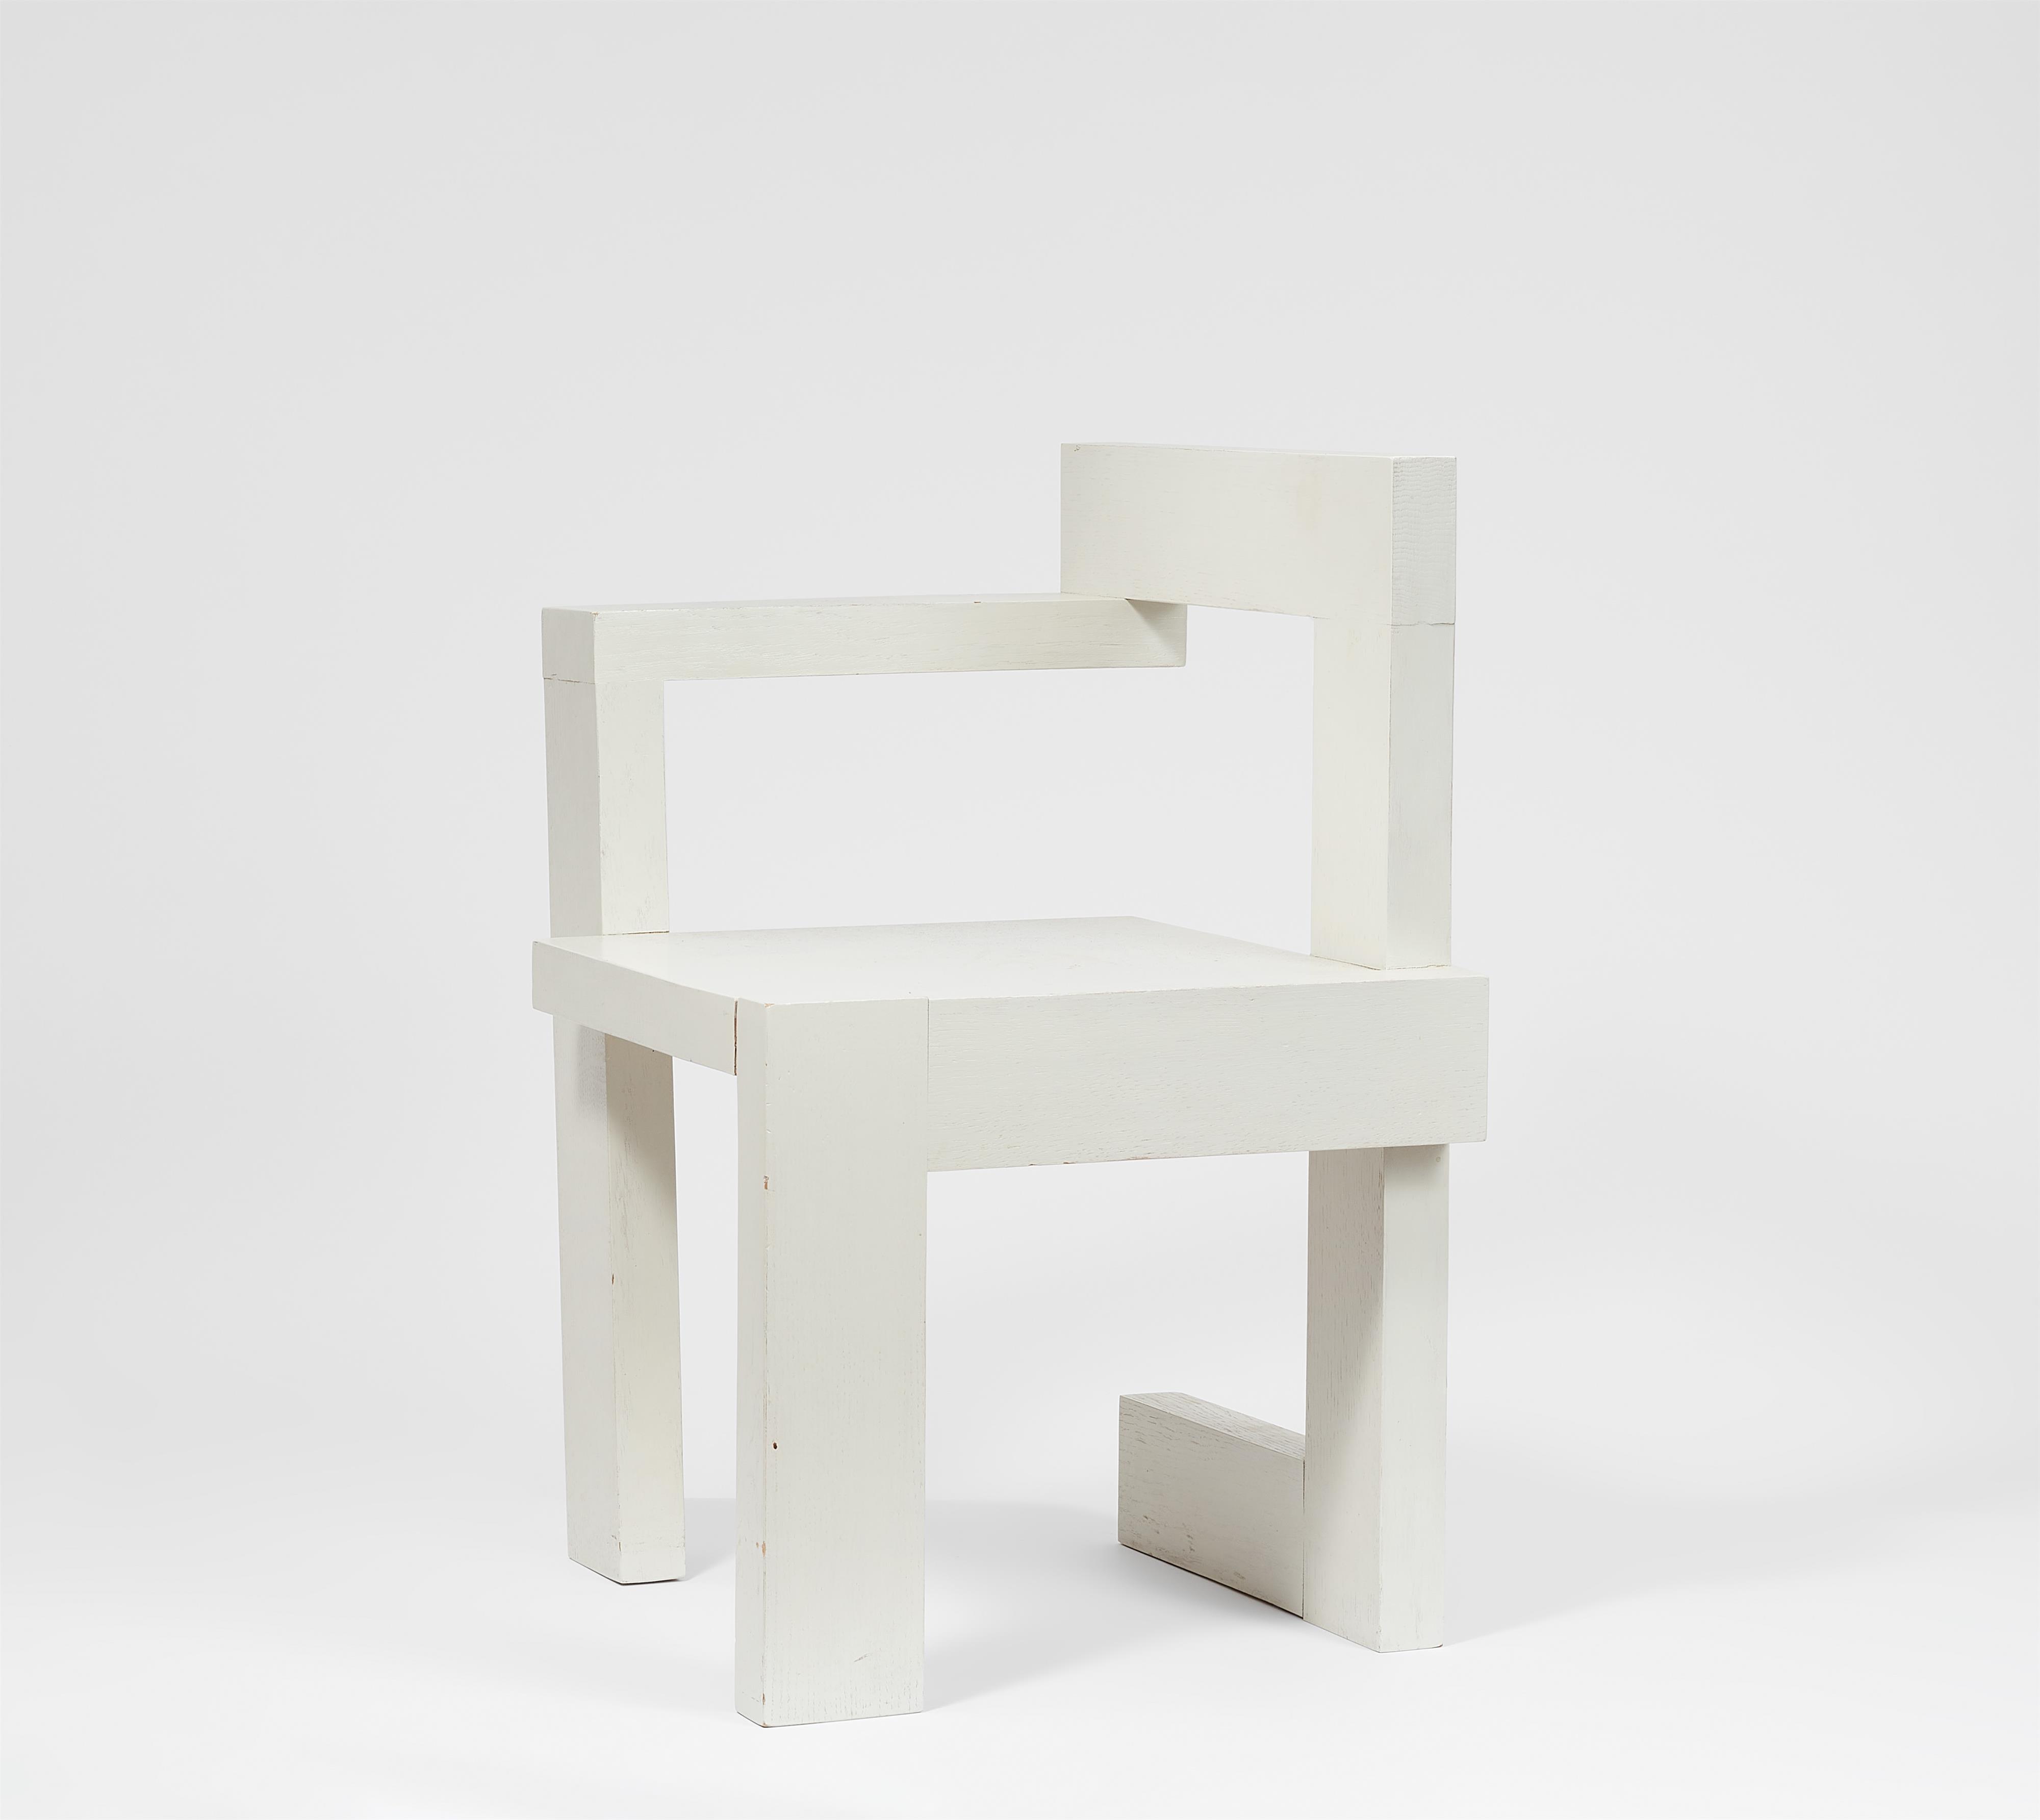 A "Steltman Stoel" chair
by Gerrit Rietveld (1888 - 1964) - image-1